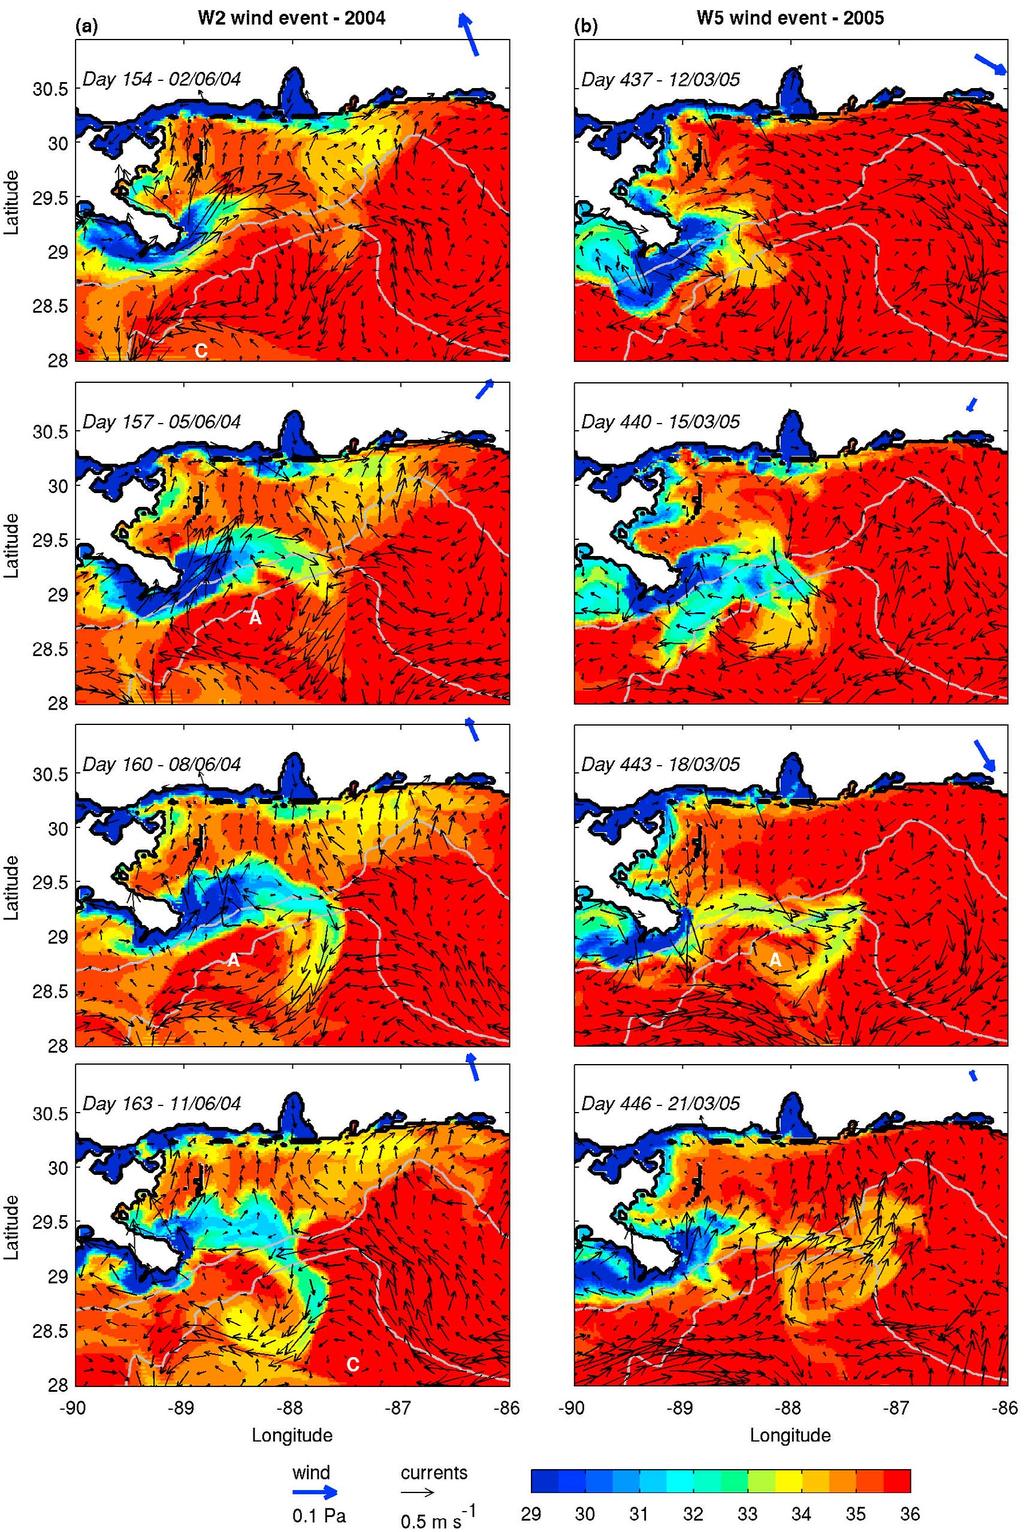 Figure 9. Snapshots of sea surface salinity and surface velocity vectors from selected days during the wind periods (a) W2 and (b) W5. Part of the model domain shown.